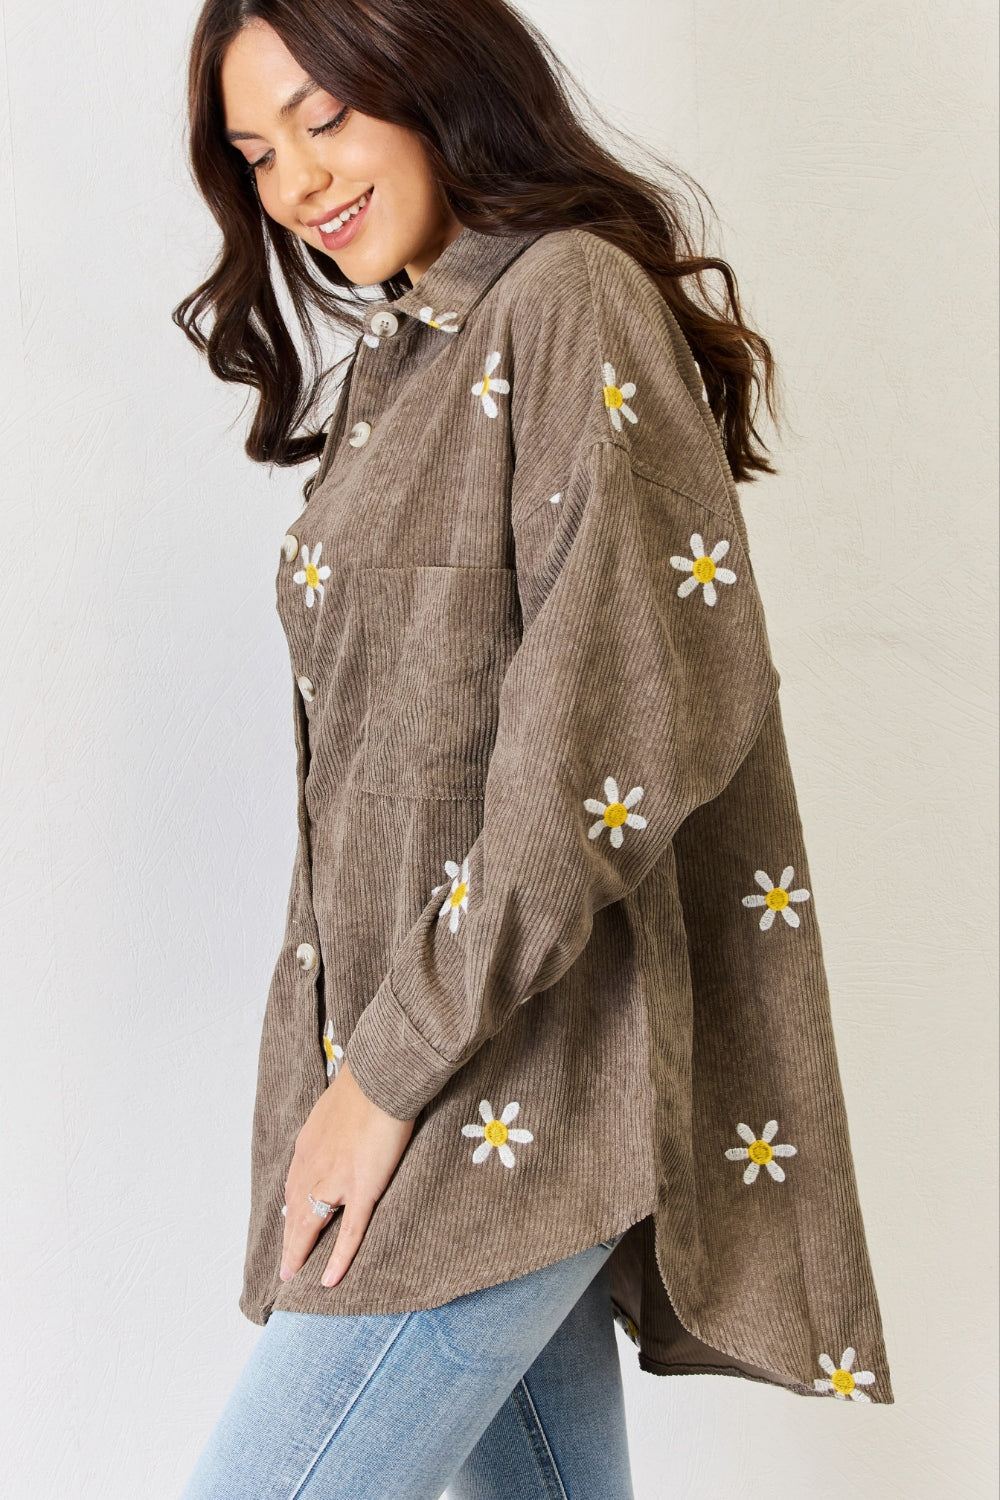 Flower Corduroy Button-up Shirt - Inspired Eye Boutique